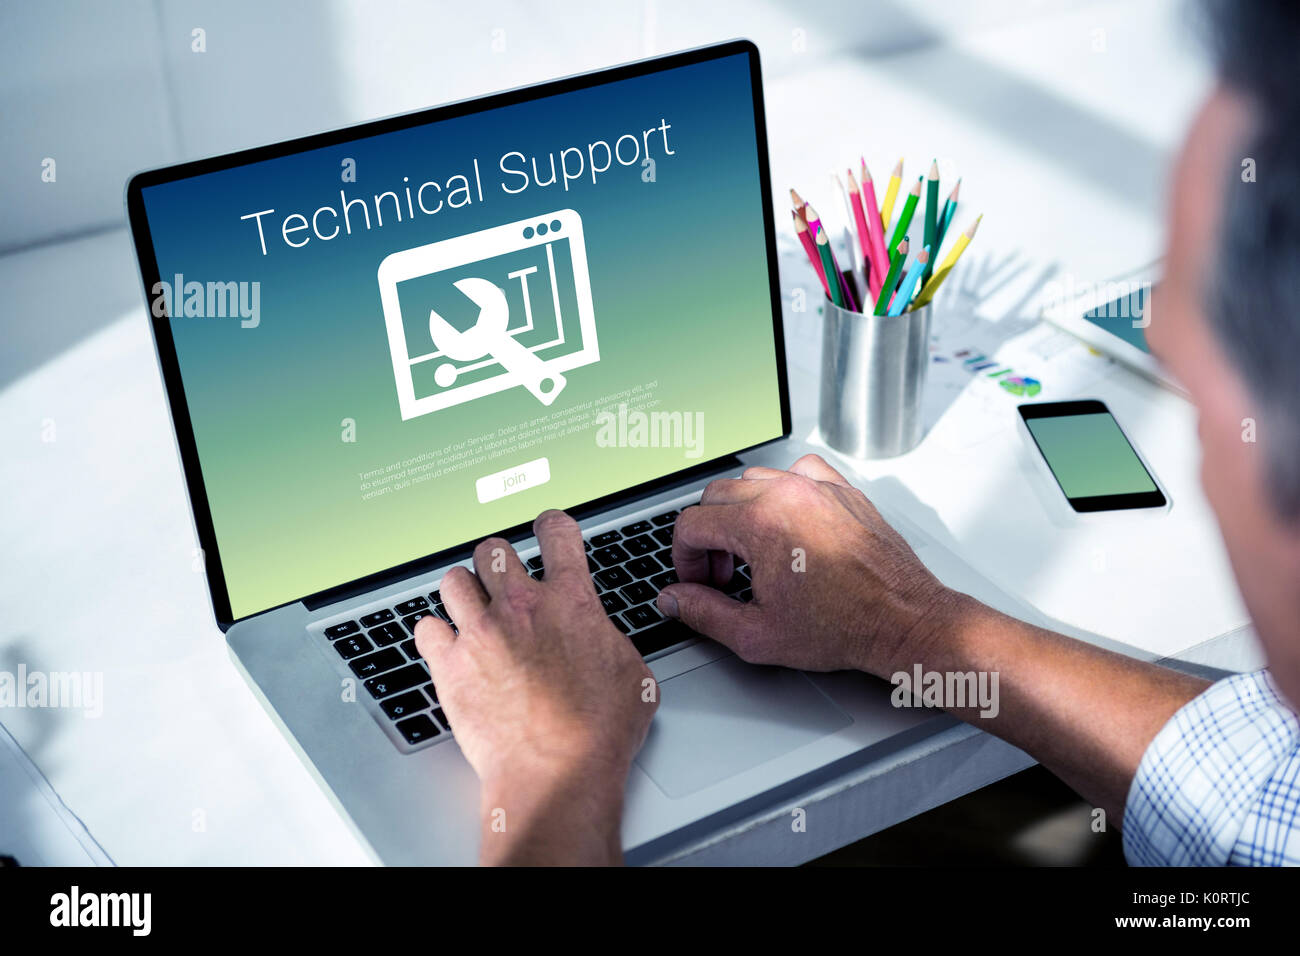 Technical support text with tool against overhead of masculine hand typing on laptop Stock Photo